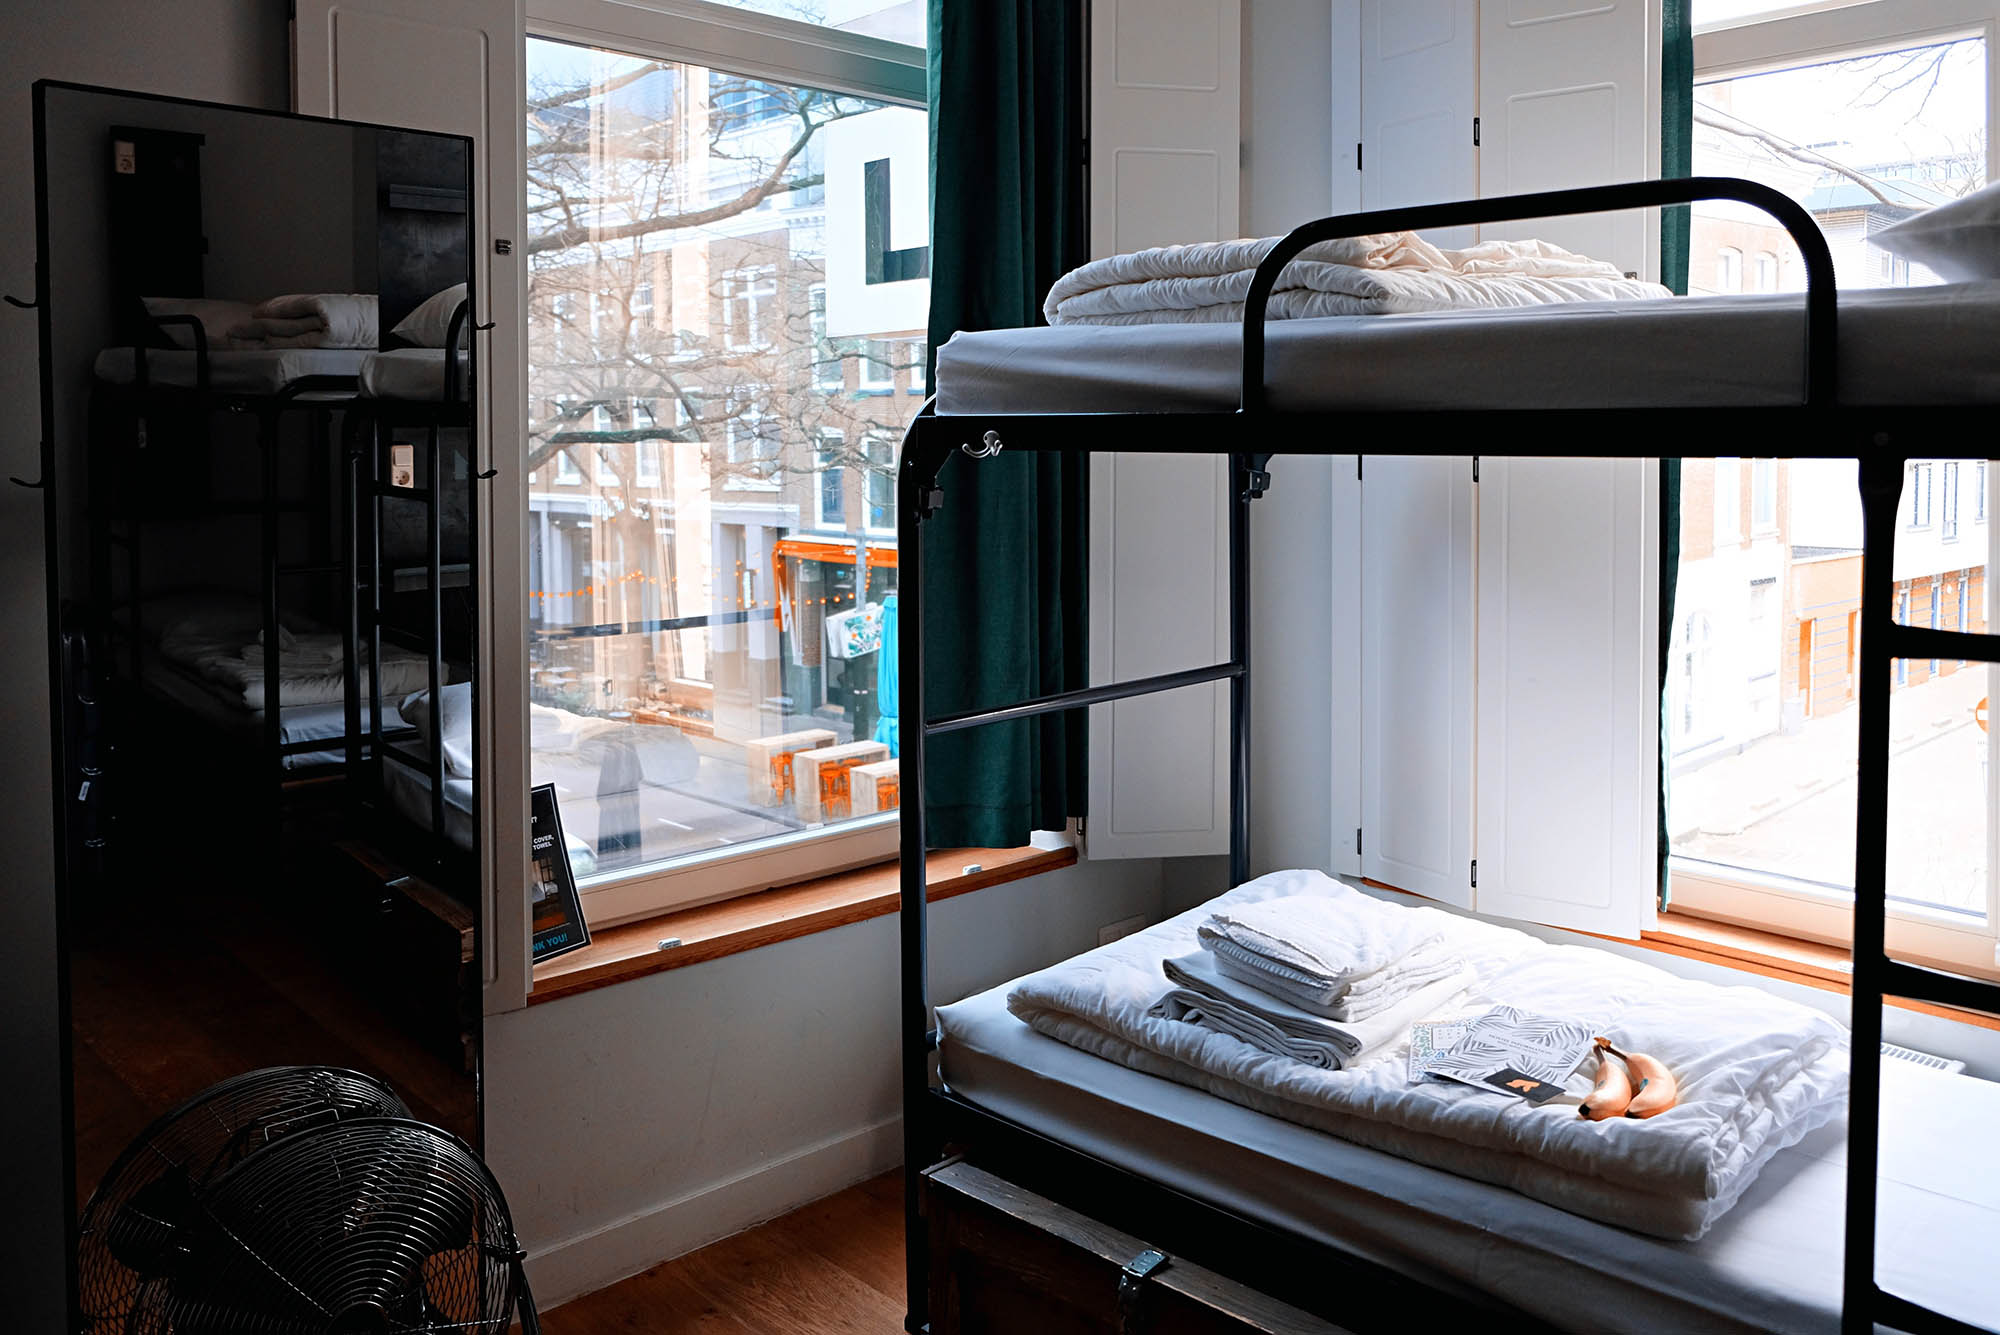 Dorm room - rules for staying in hostels article